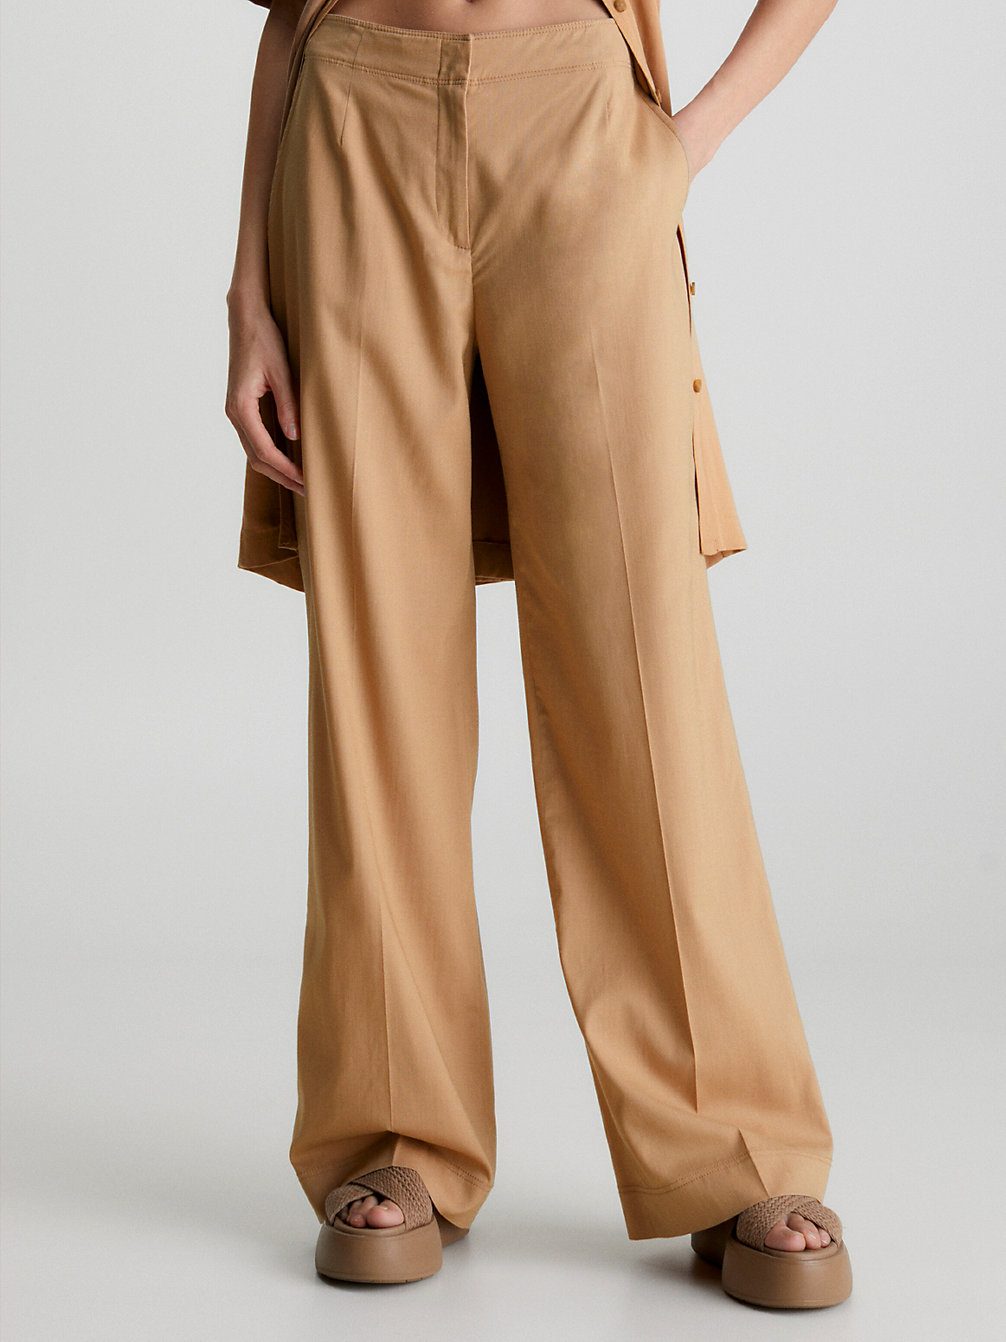 TIMELESS CAMEL Straight Soft Tailored Trousers undefined women Calvin Klein